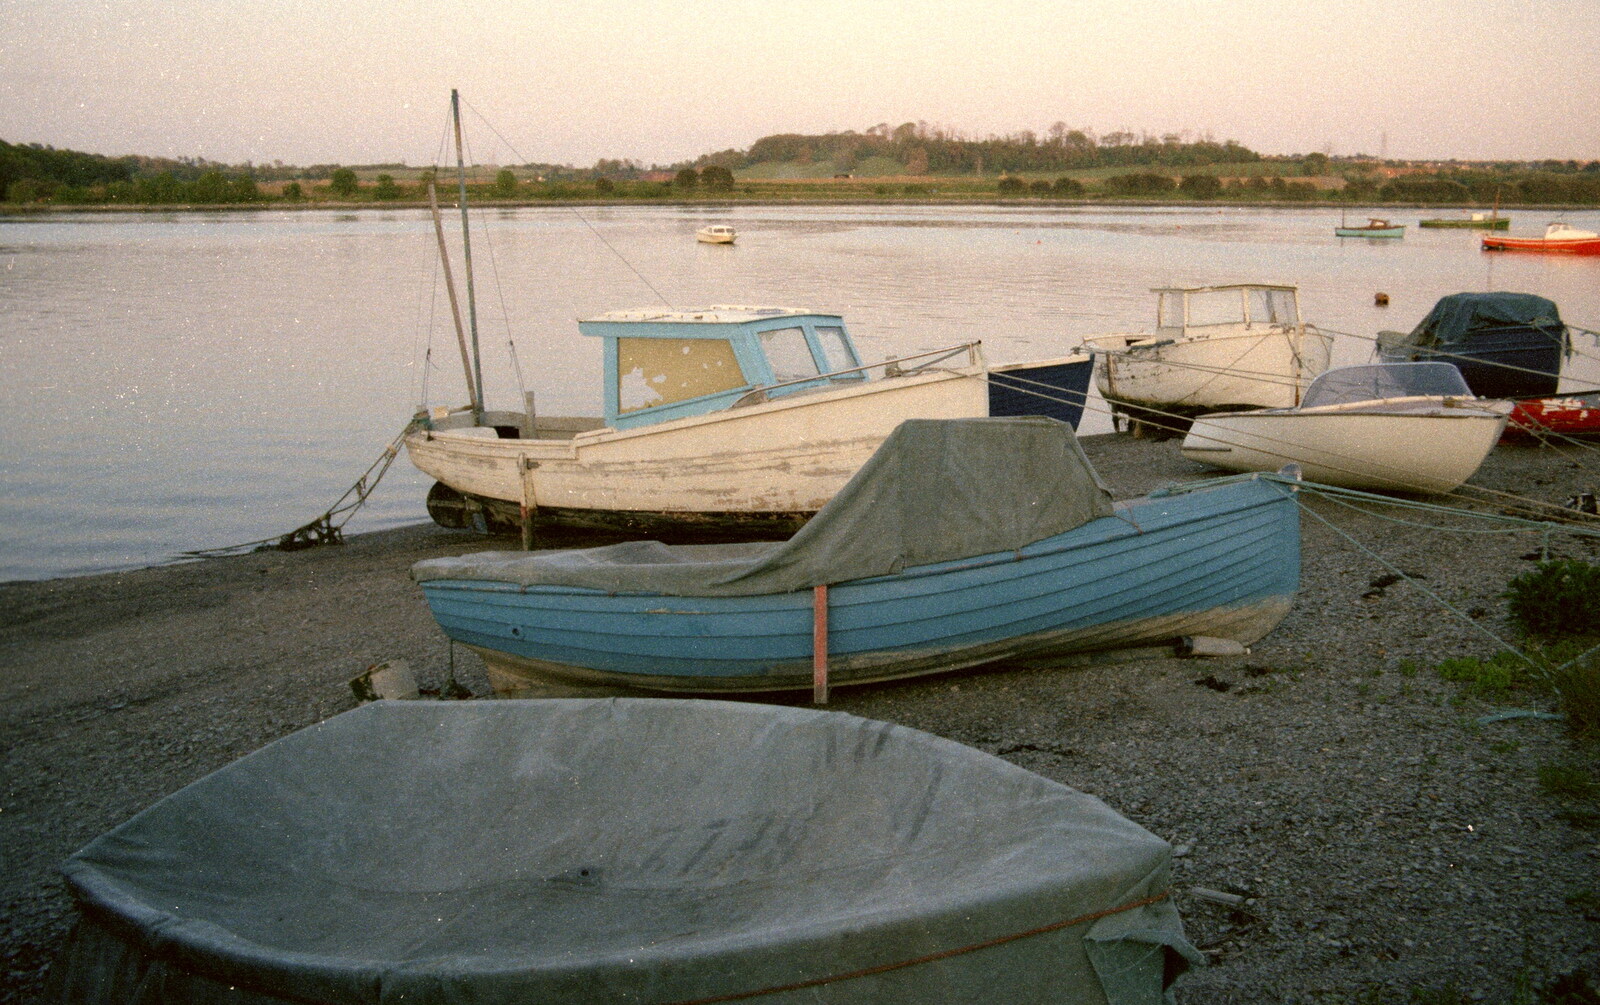 The silent sorrow of empty boats from Uni: Scenes of Plymouth and the PPSU Bar, Plymouth Polytechnic, Devon - 28th April 1986